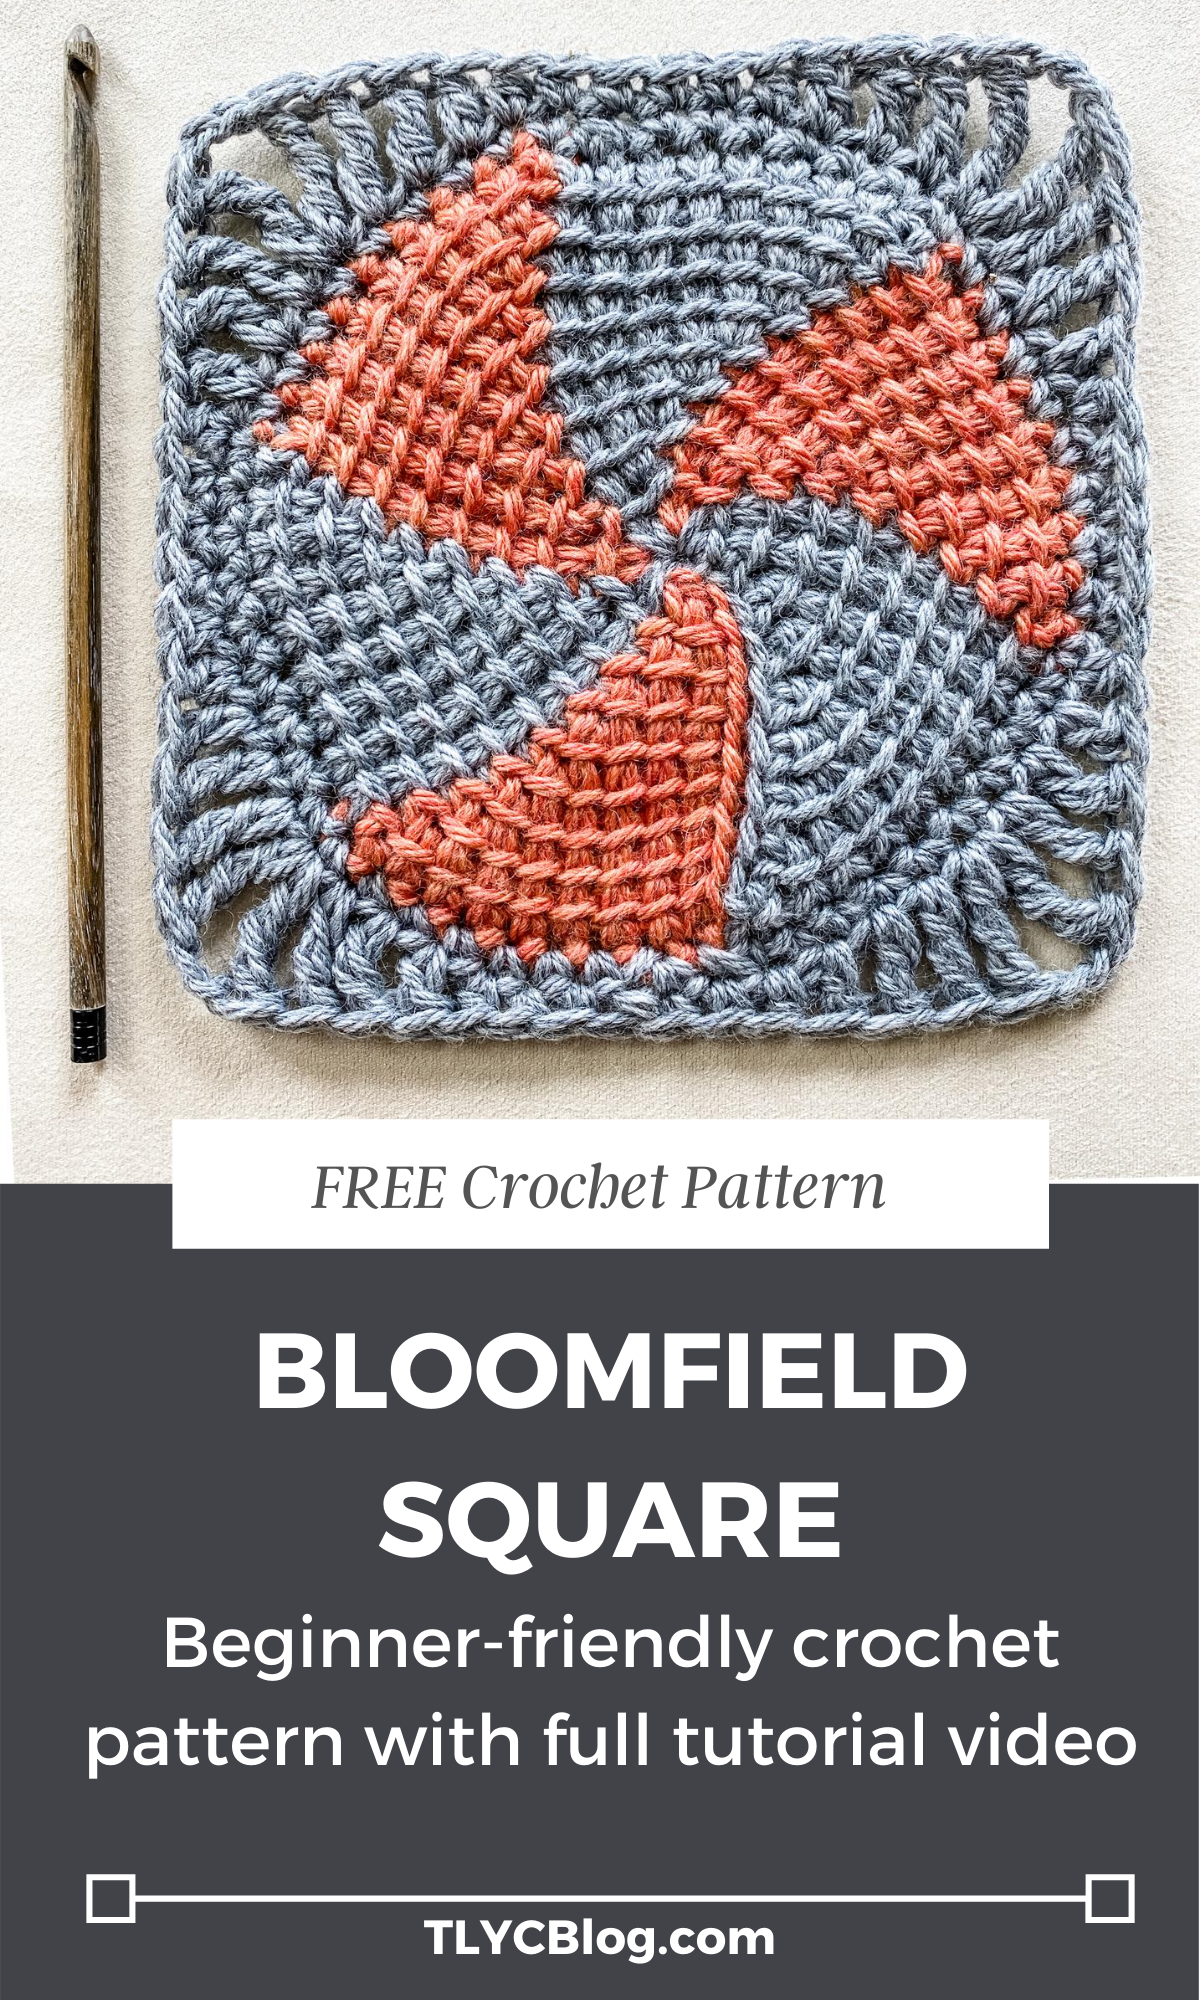 Bloomfield Square | Make this fun and easy Tunisian crochet granny square with just a bit of yarn. Crochet a center circle using short rows then add a simple border. Crochet several for a blanket or afghan, scarf, or pillow. Get the free crochet pattern now. | TLYCBlog.com